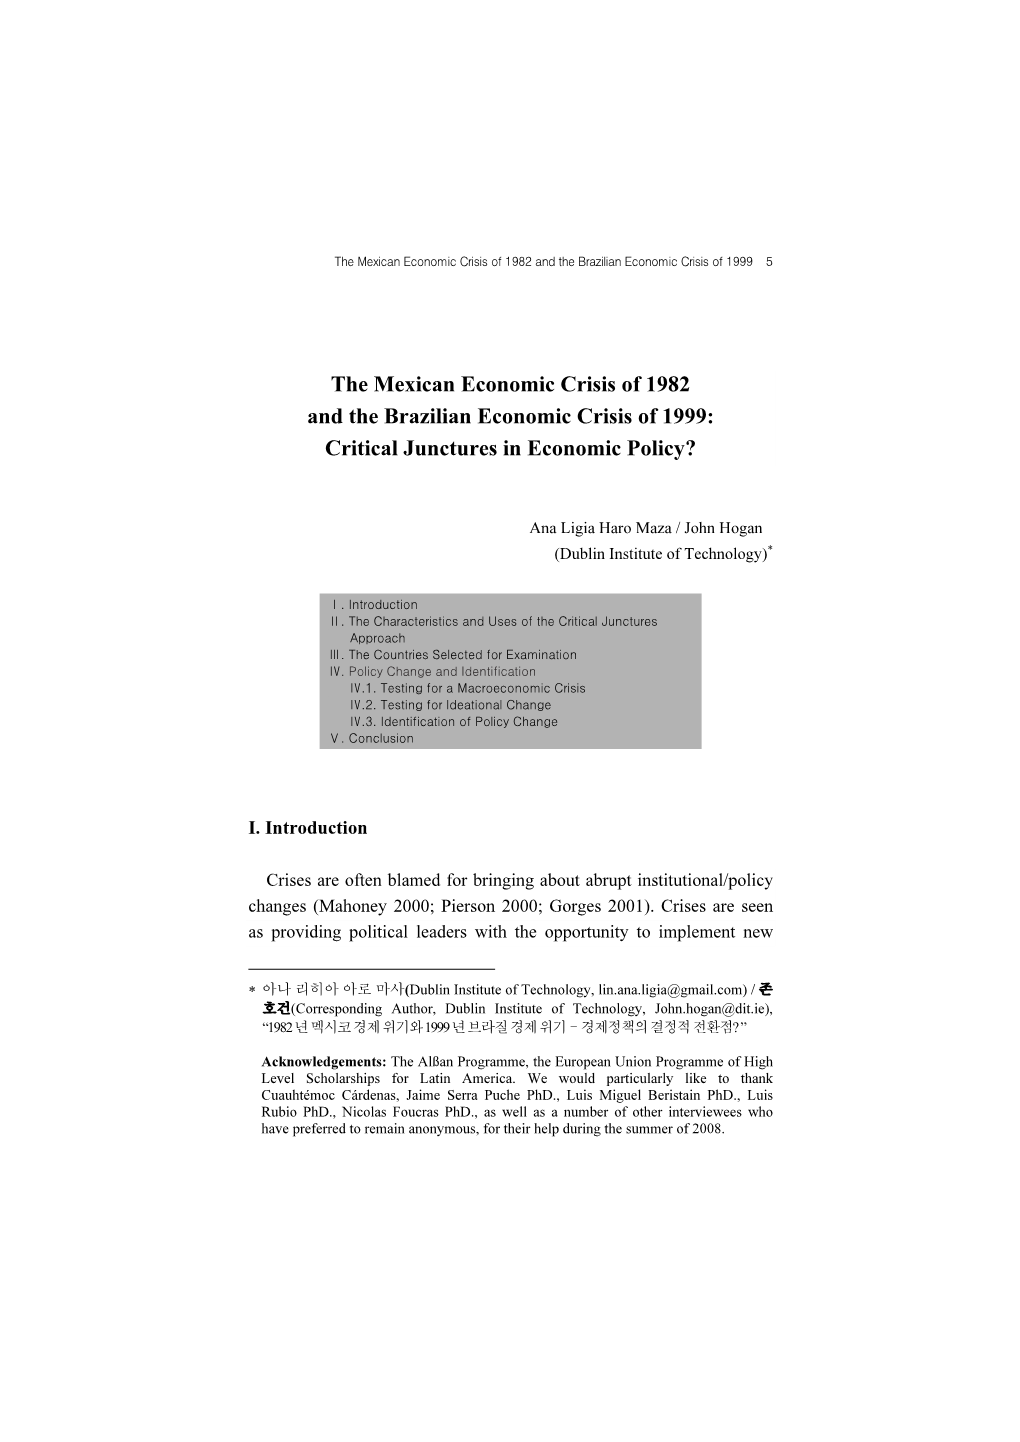 The Mexican Economic Crisis of 1982 and the Brazilian Economic Crisis of 1999 5